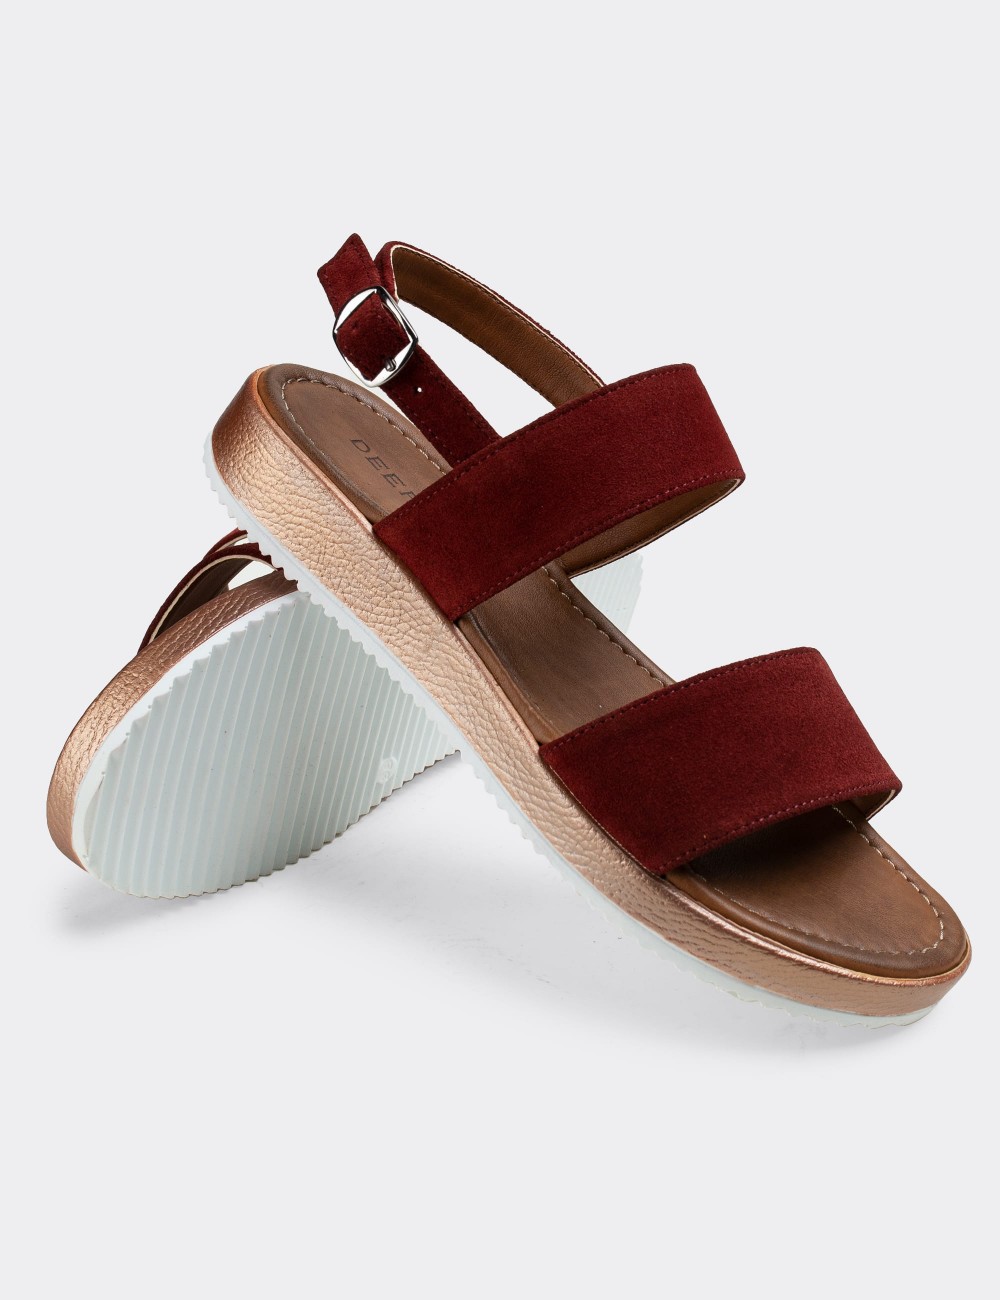 Burgundy Suede Leather Sandals - 02120ZBRDC01